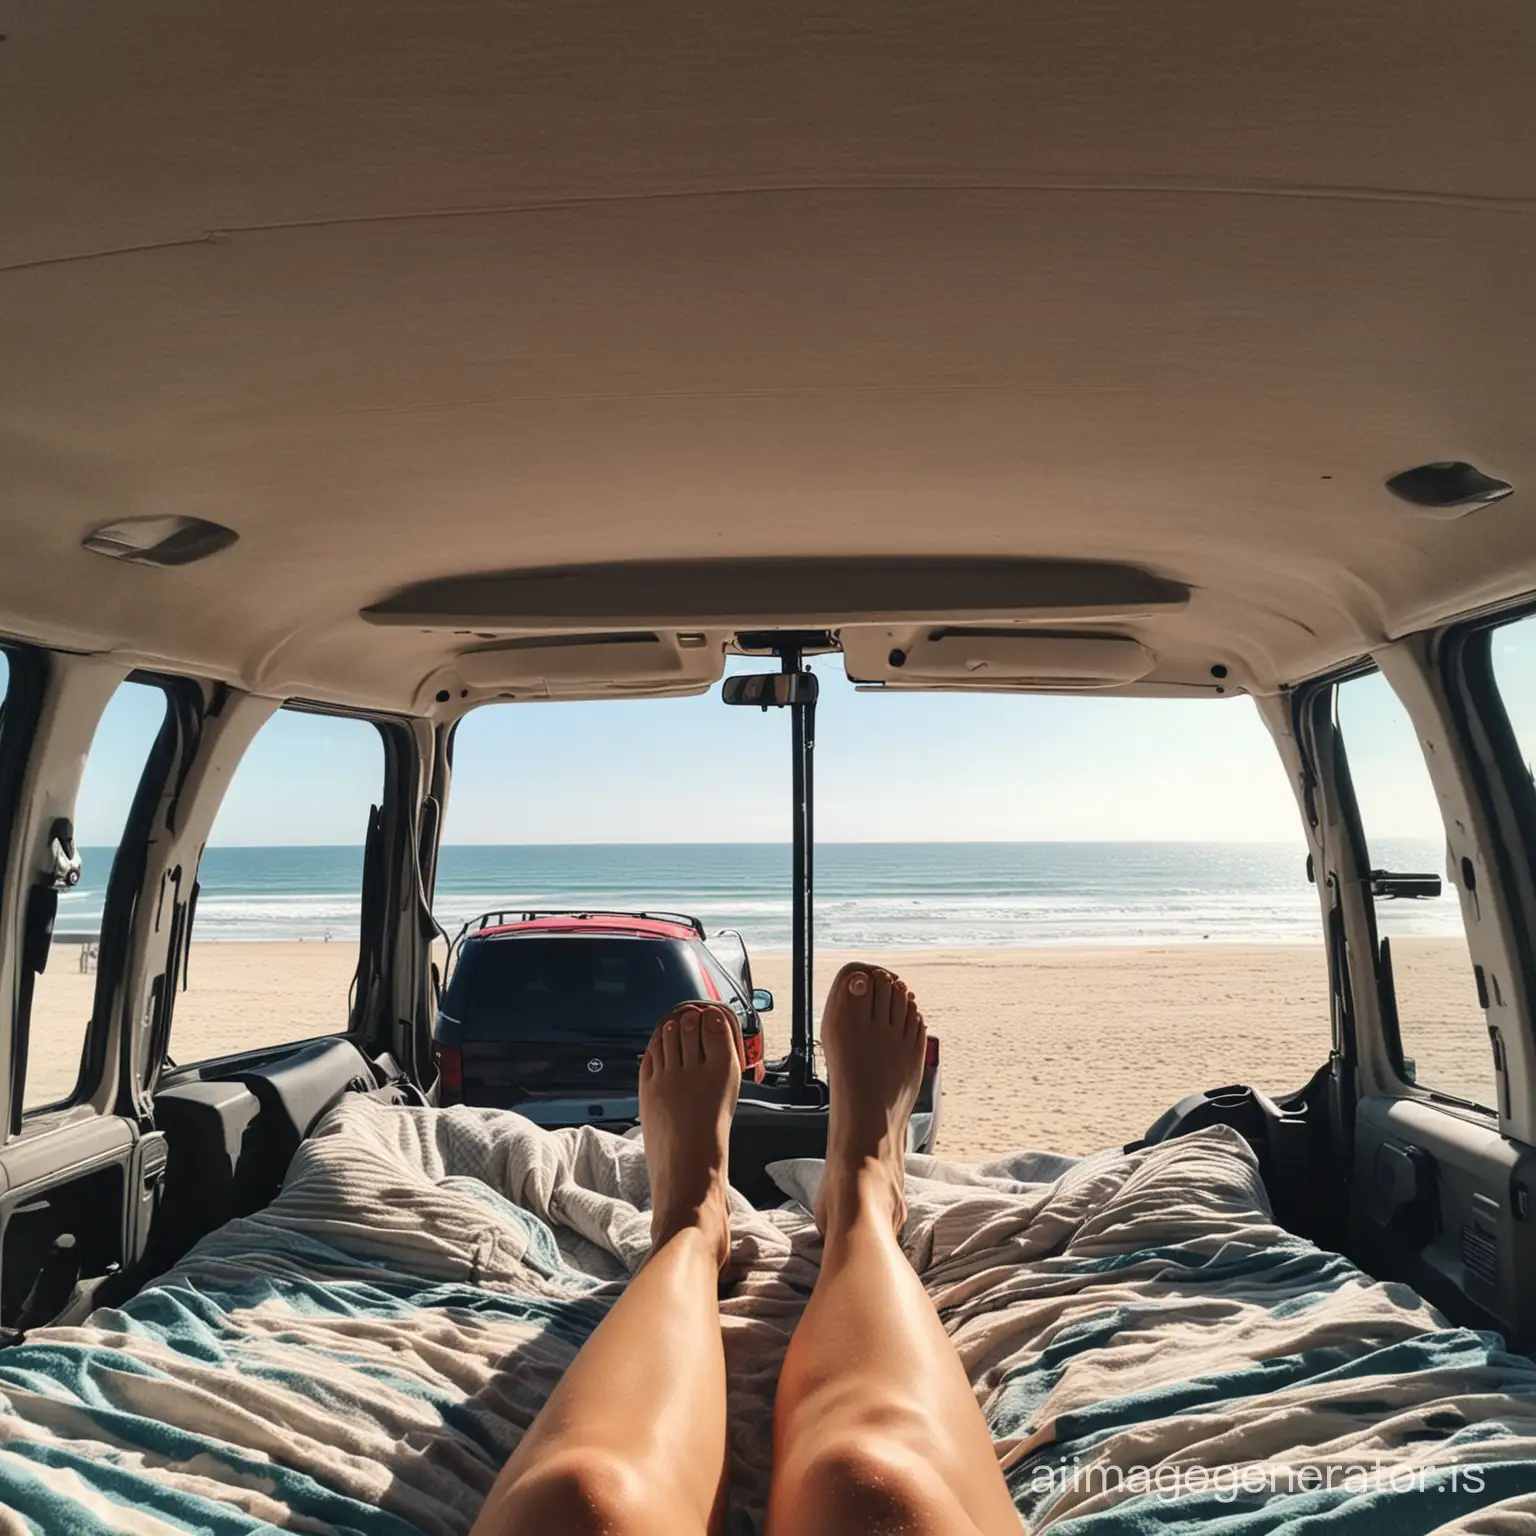 You lie in the trunk and there's a great view from the minivan of the beach.